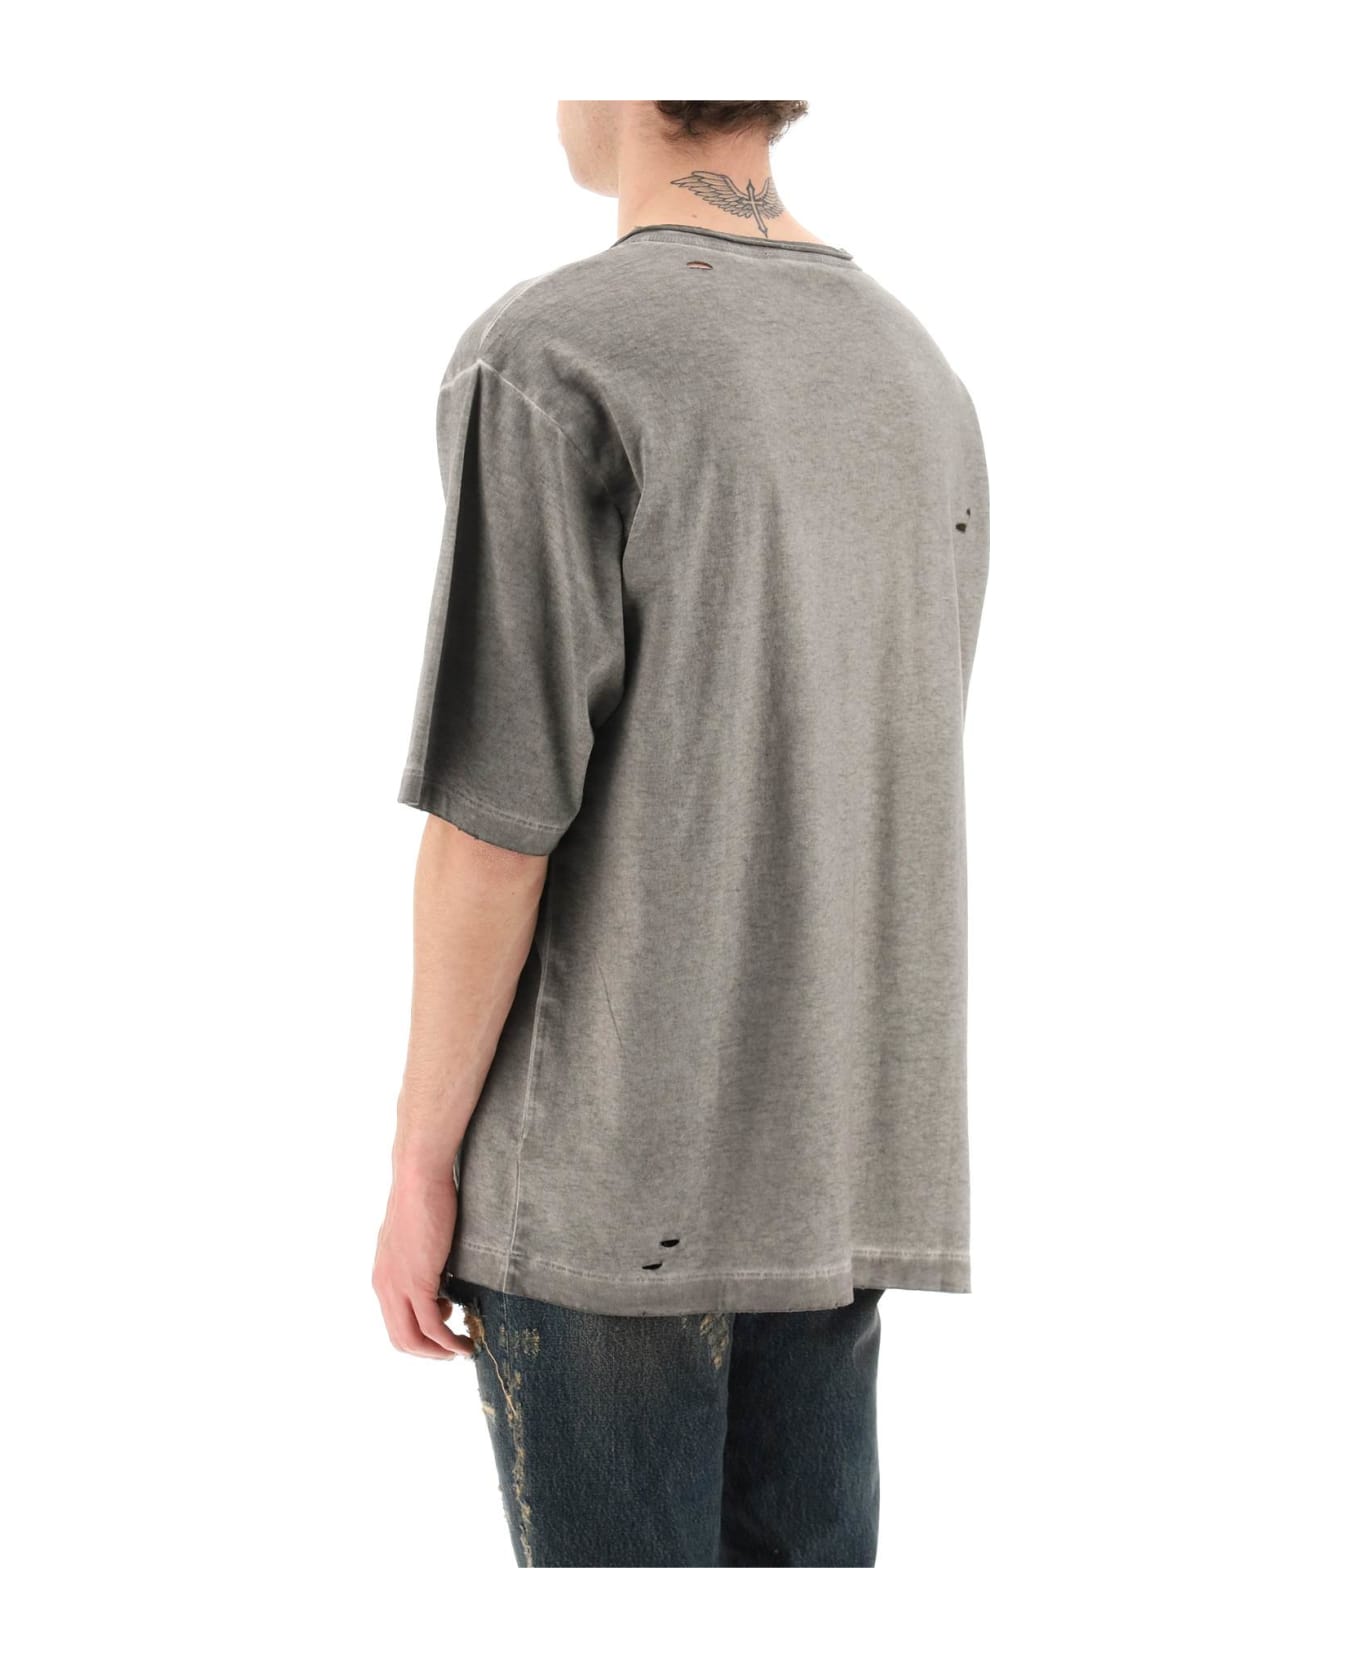 Dolce & Gabbana Washed Cotton T-shirt With Destroyed Detailing - VARIANTE ABBINATA (Grey)